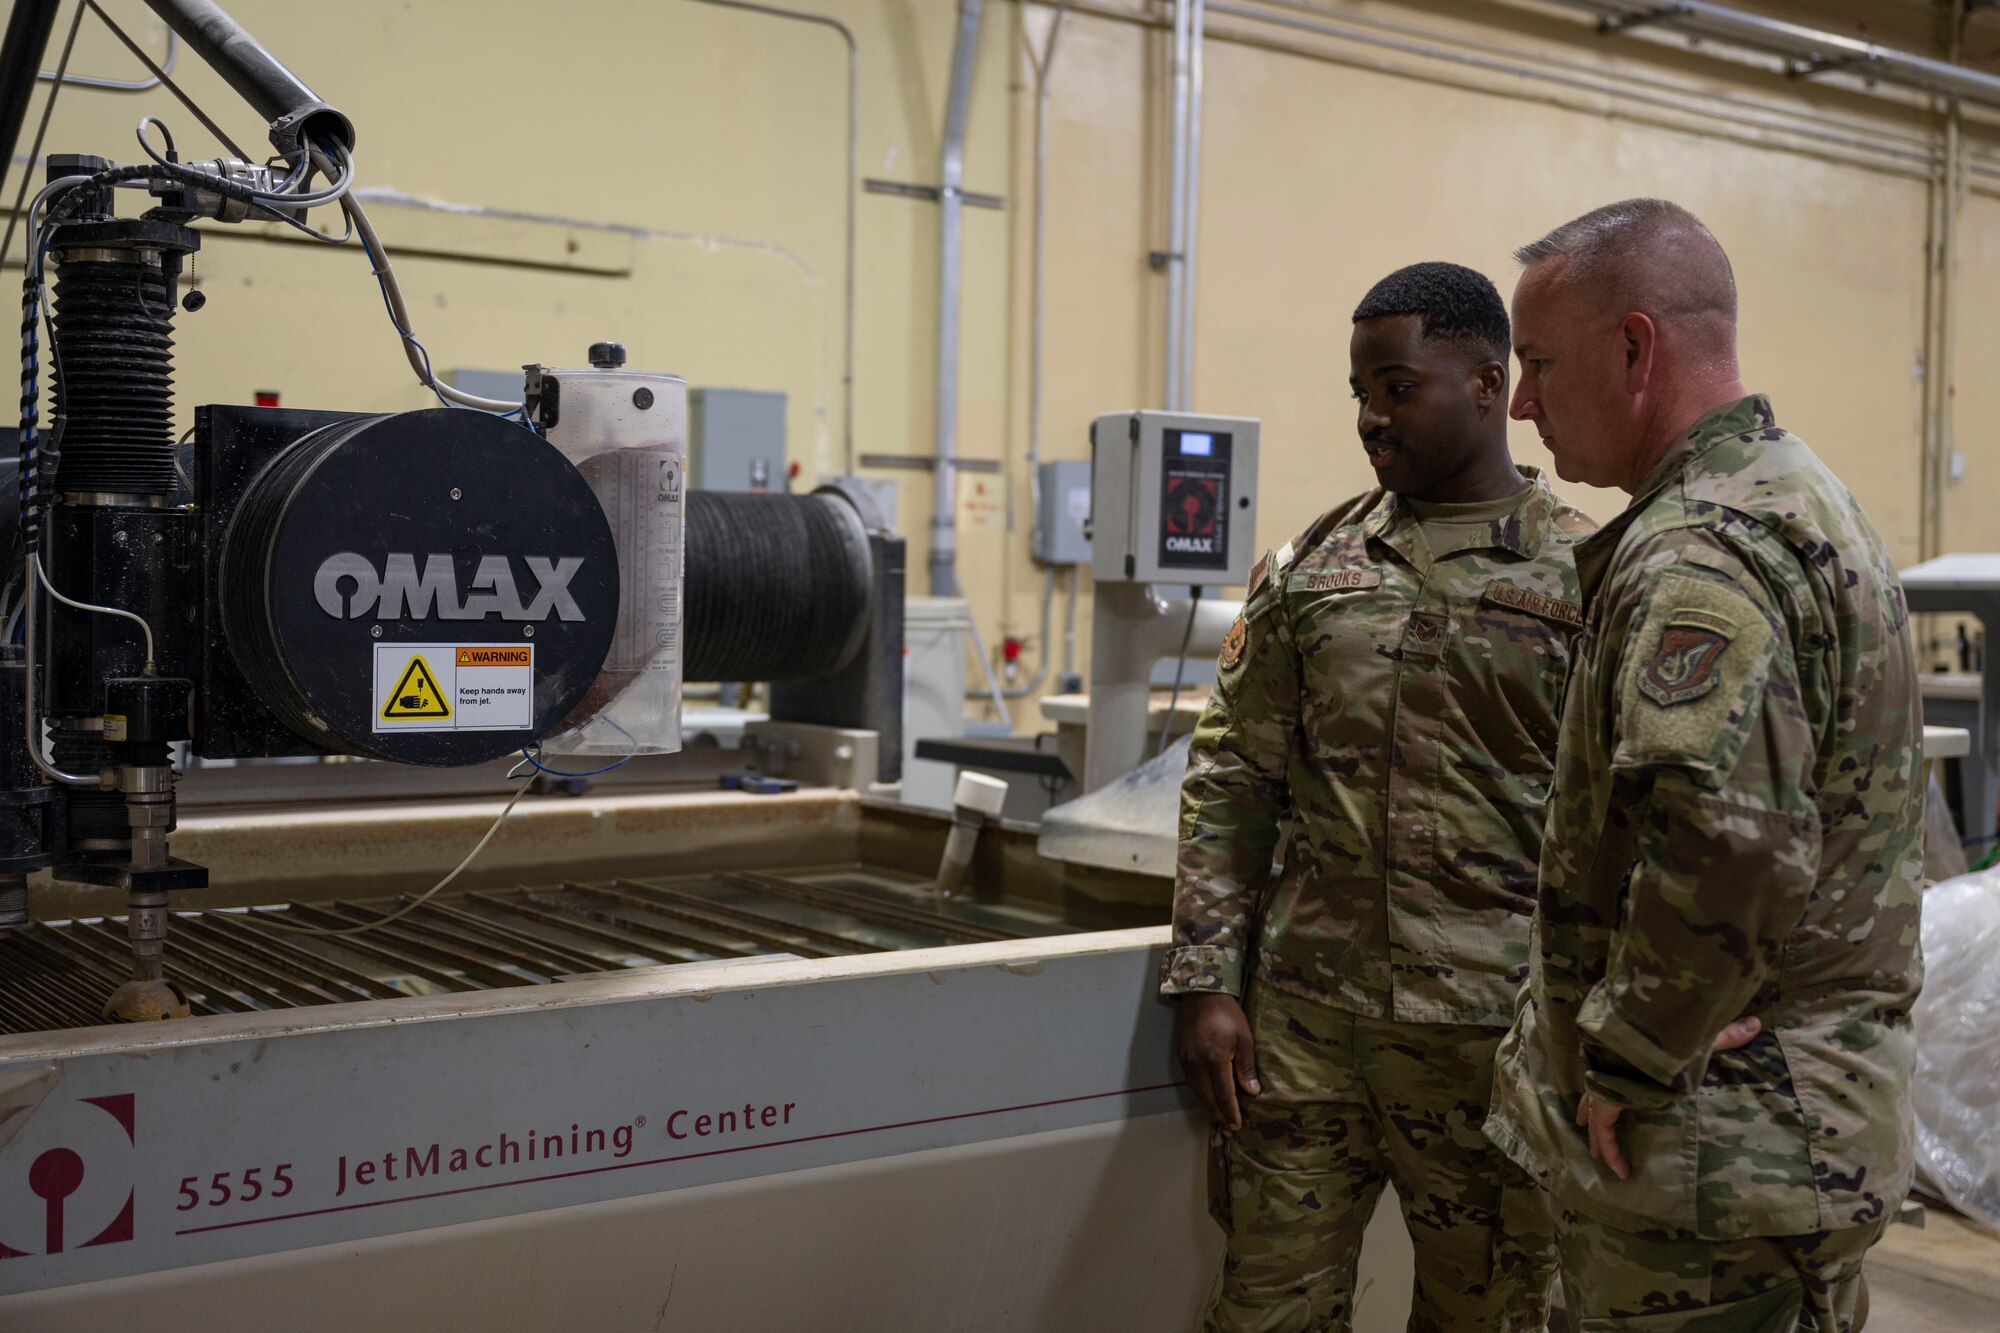 U.S. Air Force Chief Master Sgt. David R. Wolfe, Pacific Air Forces command chief, is briefed by an Airman with the 36th Maintenance Group on a water jet cutter at Andersen Air Force Base, Guam, April 14, 2022.